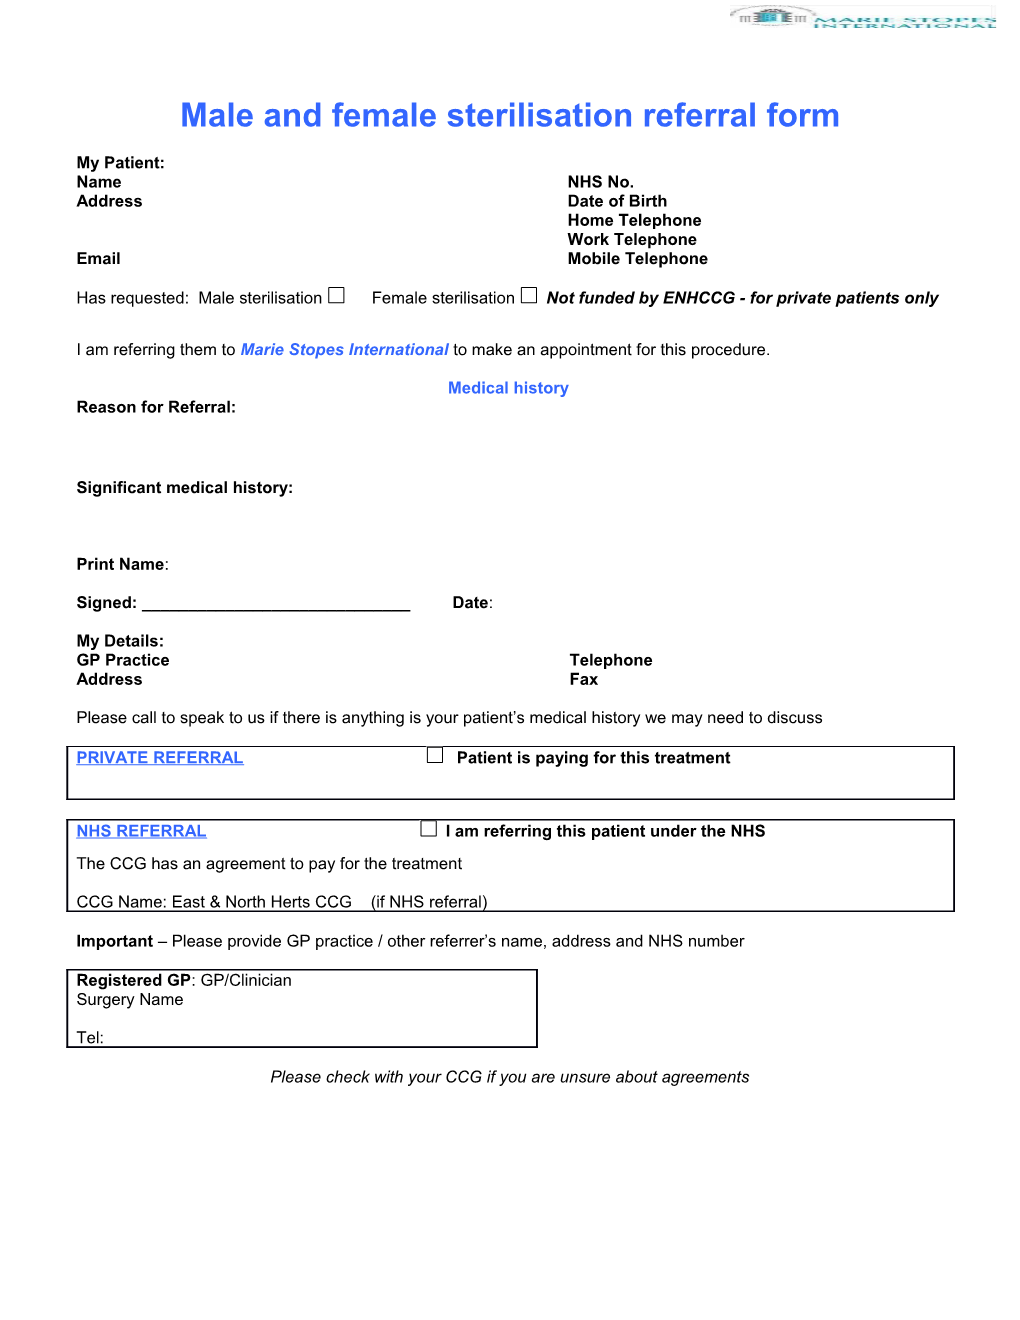 Male and Female Sterilisation Referral Form